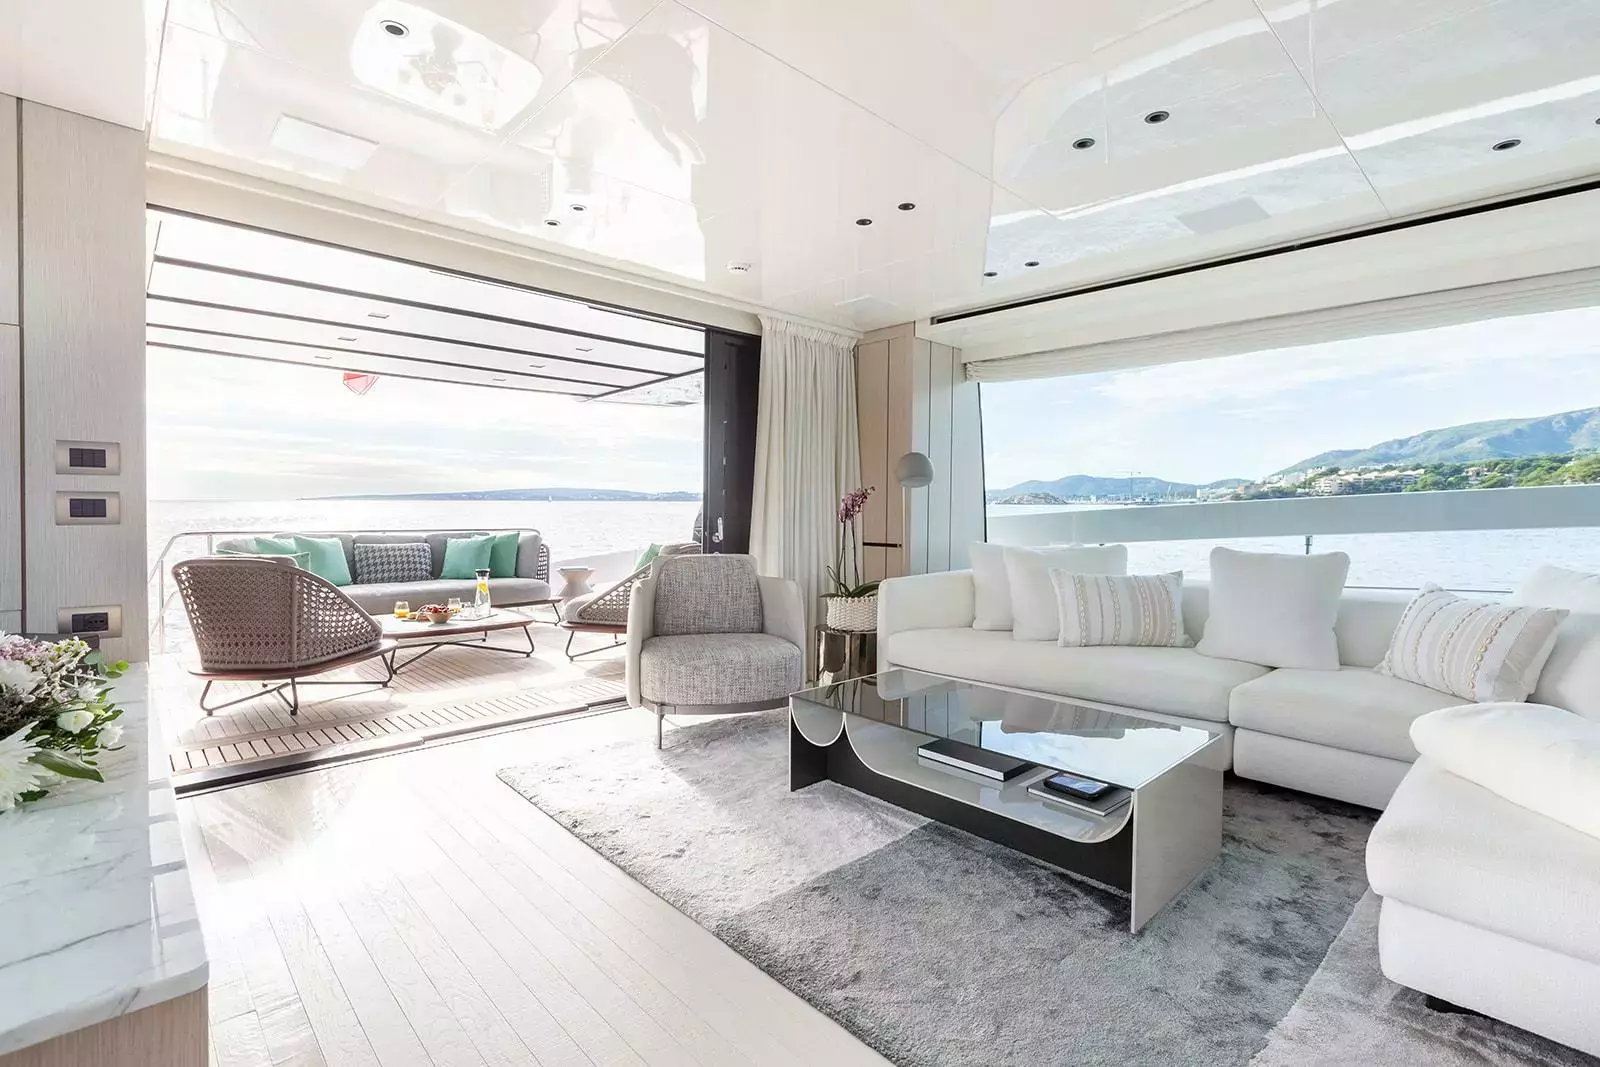 Cloud IX by Sanlorenzo - Special Offer for a private Motor Yacht Charter in Denia with a crew